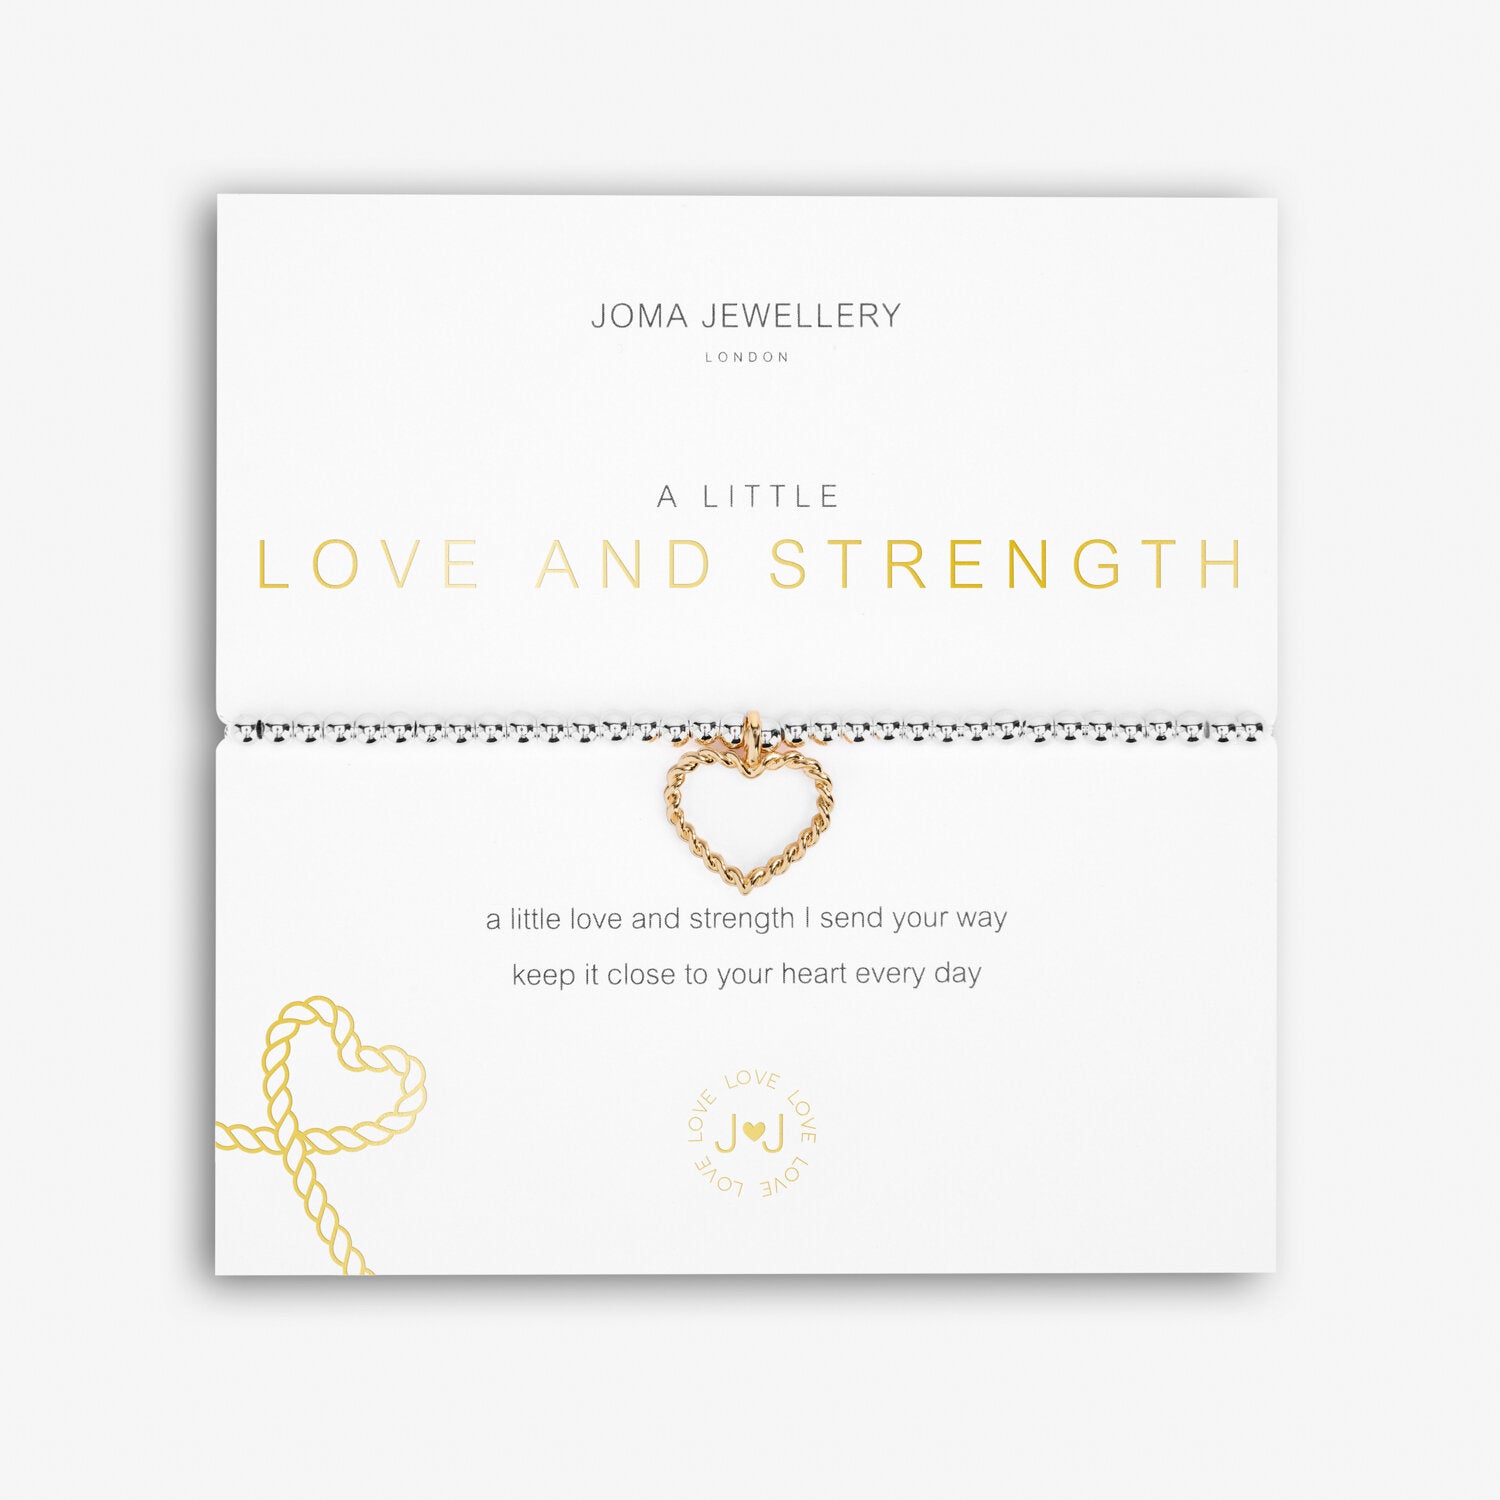 Joma Jewellery A Little 'Love And Strength' Bracelet | More Than Just A Gift